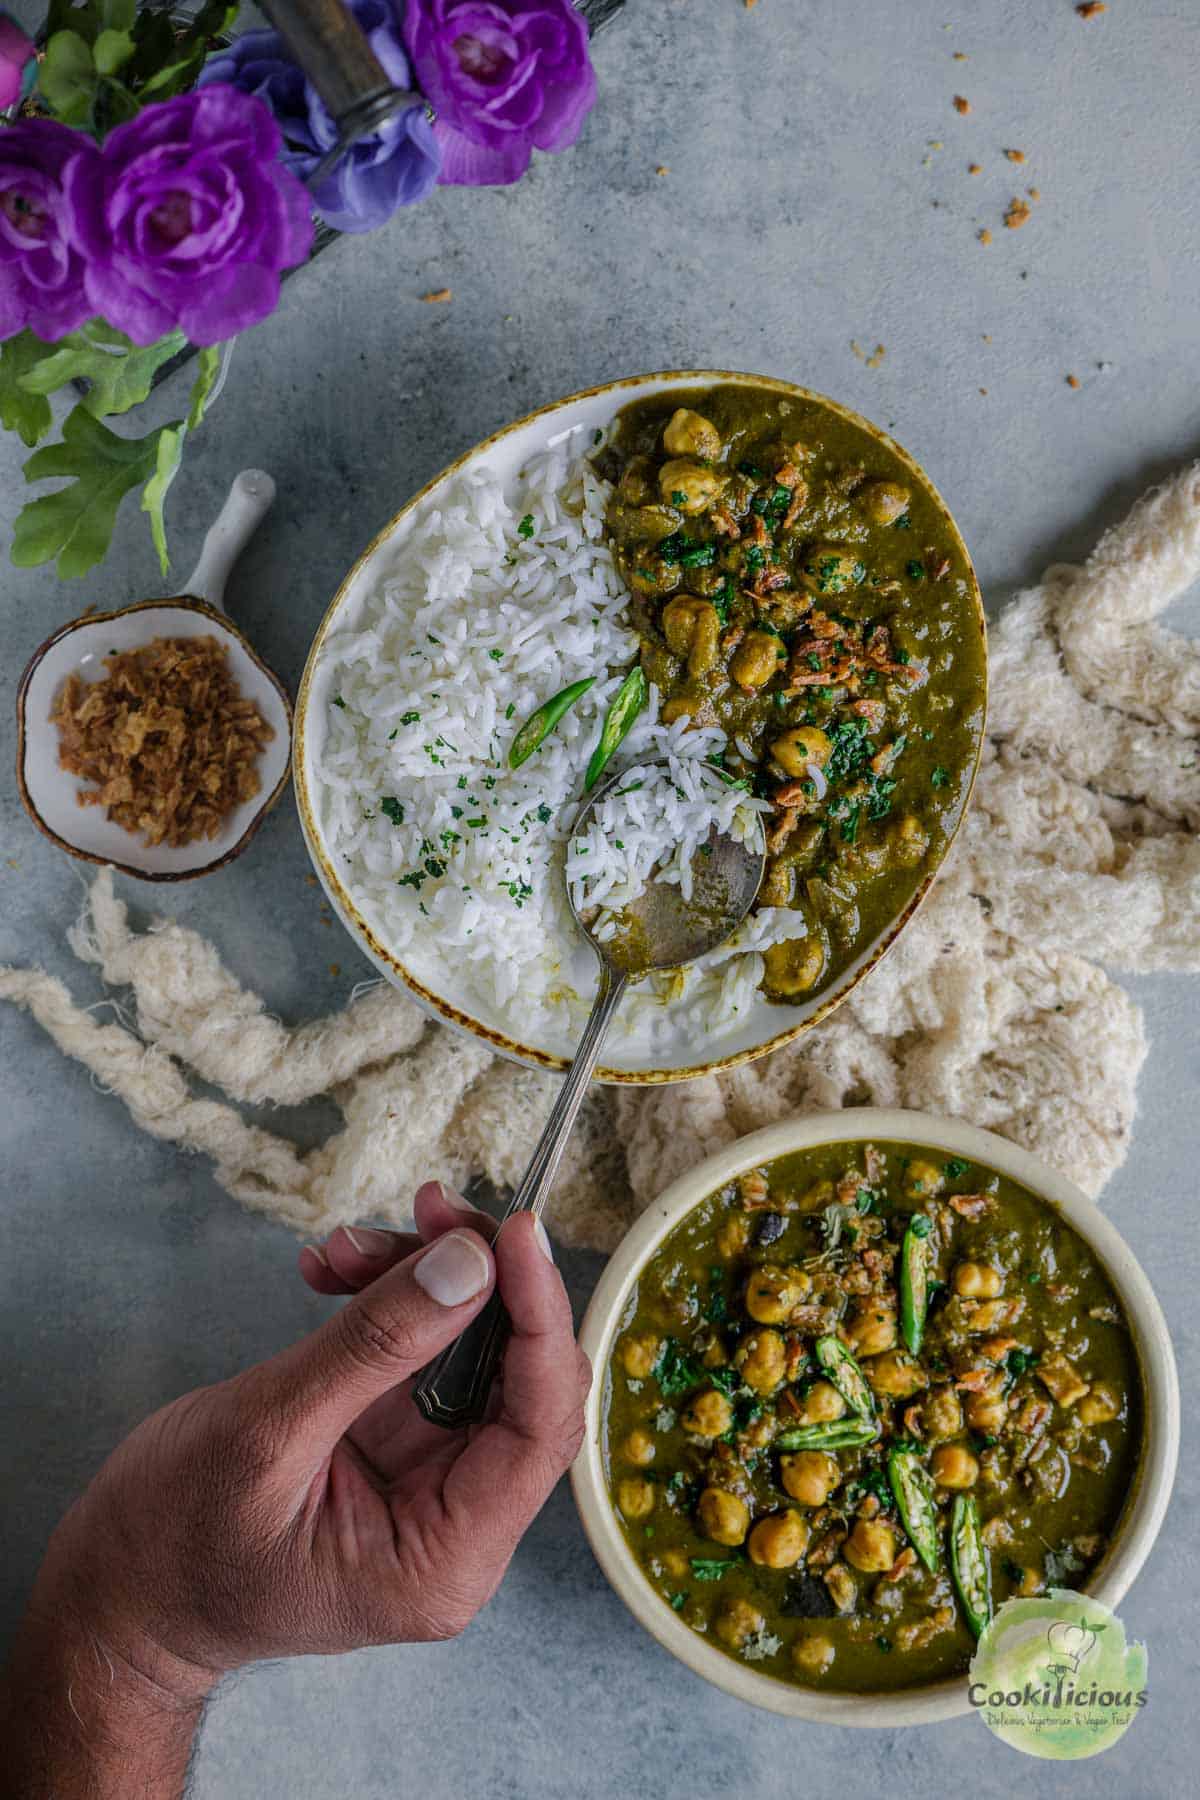 A hand digging into a plate filled with Chickpea Spinach Curry and rice, holding a spoon